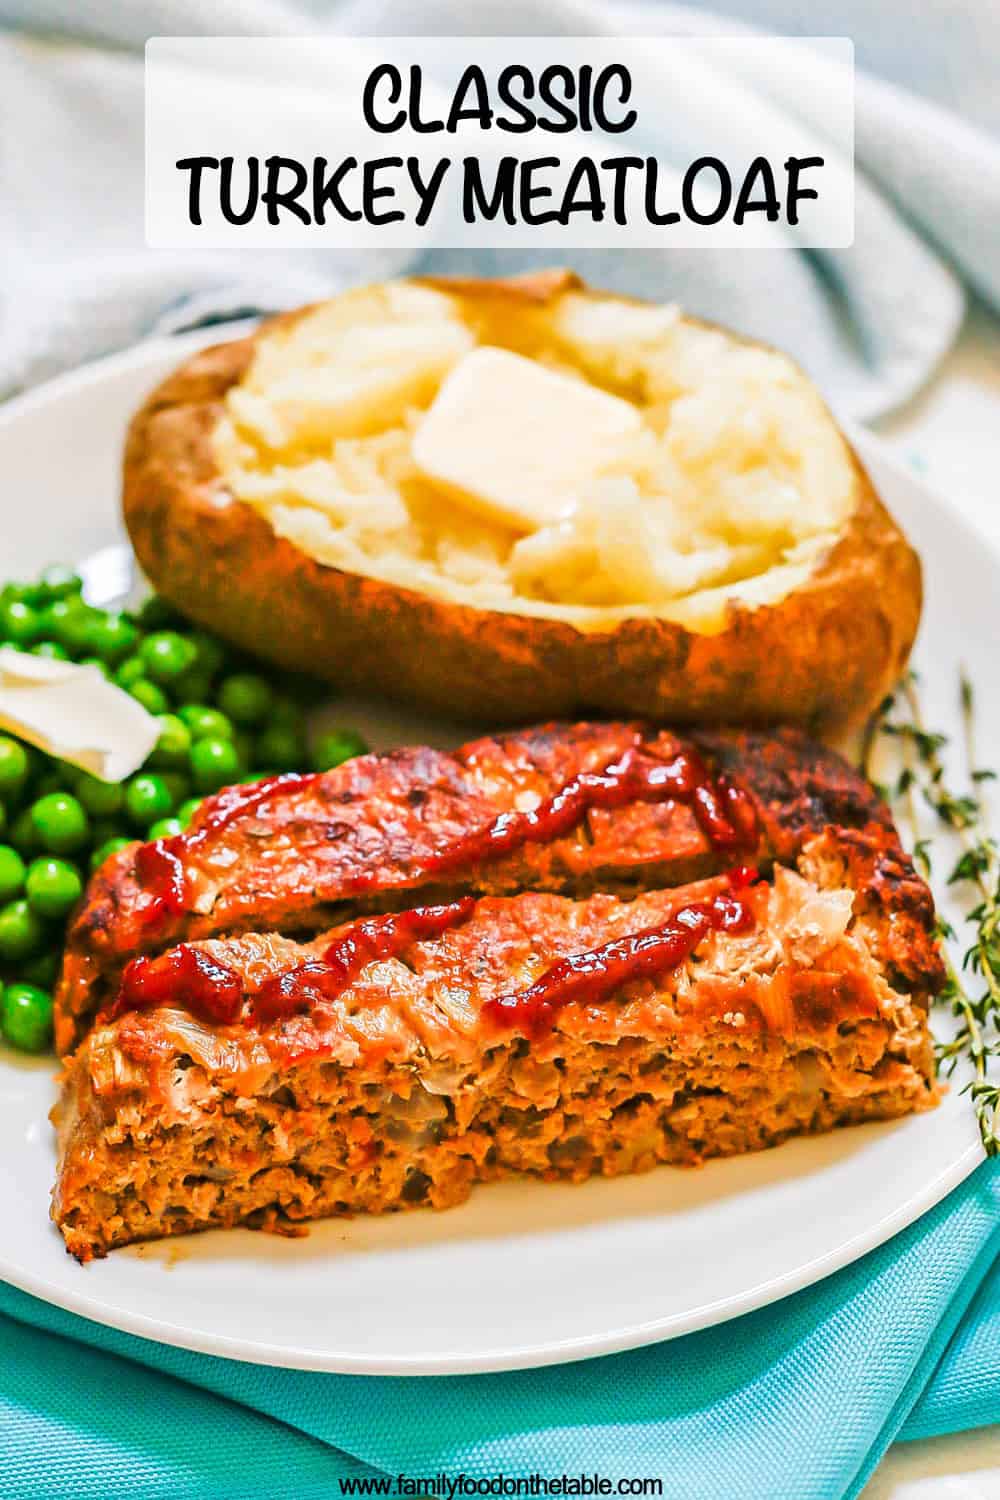 Ground turkey meatloaf slices served on a white plate with a baked potato and green peas and an image overlay on the photo